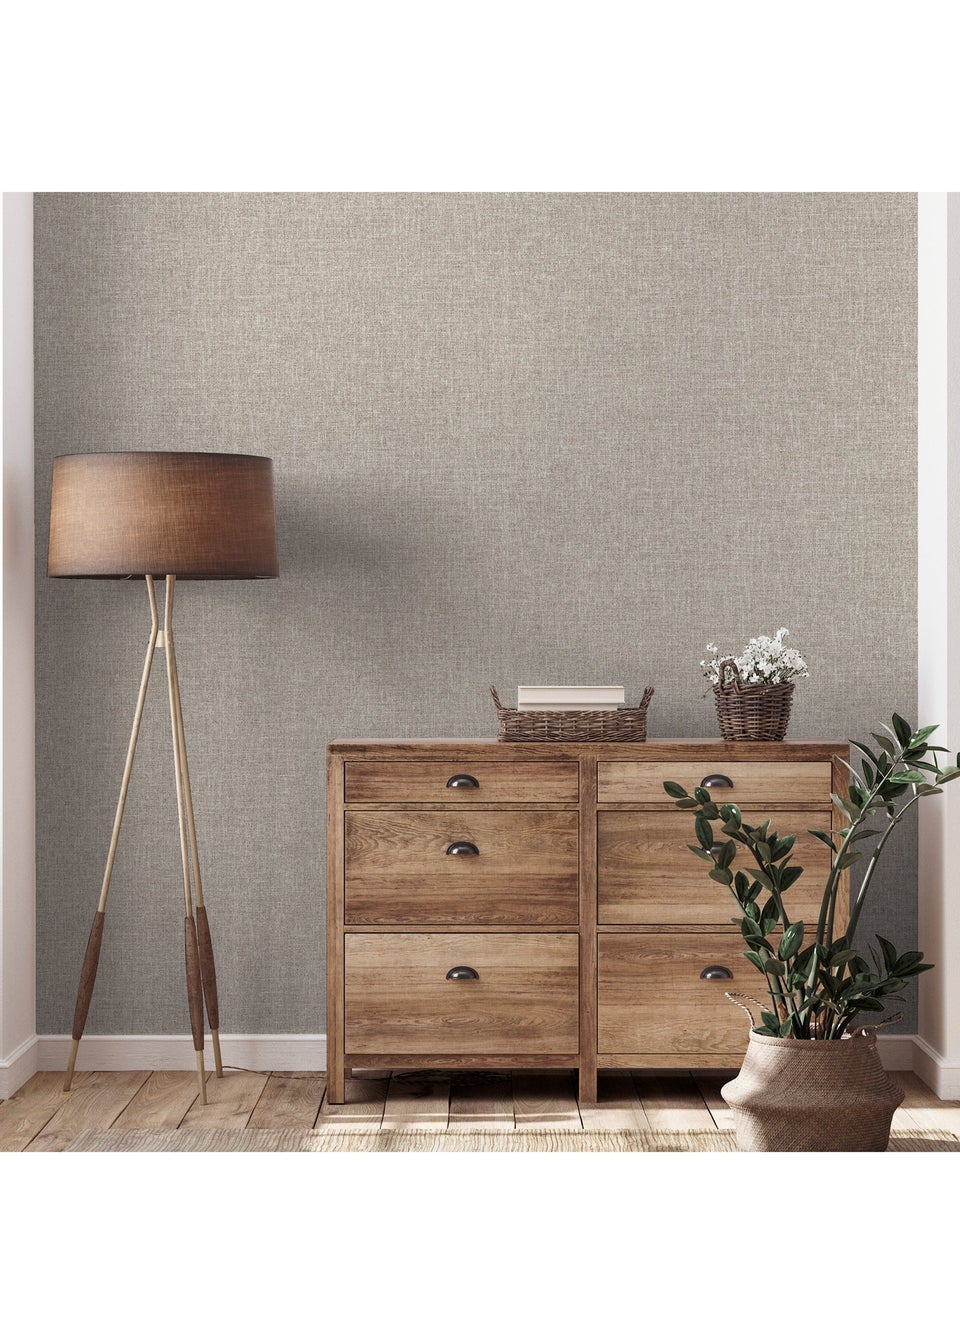 Arthouse Country Plain Taupe